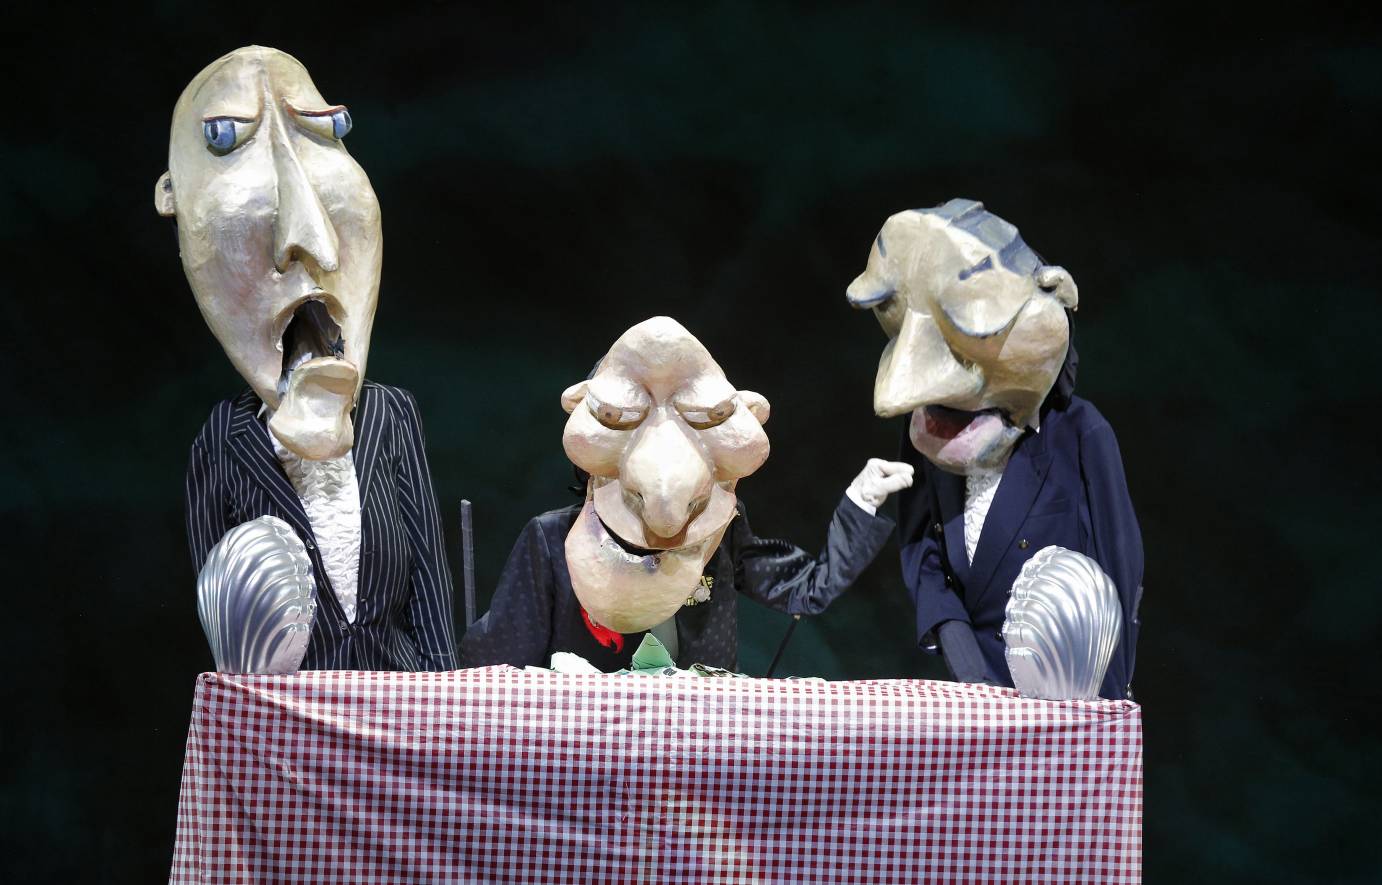 Three big-headed puppets sit at a table